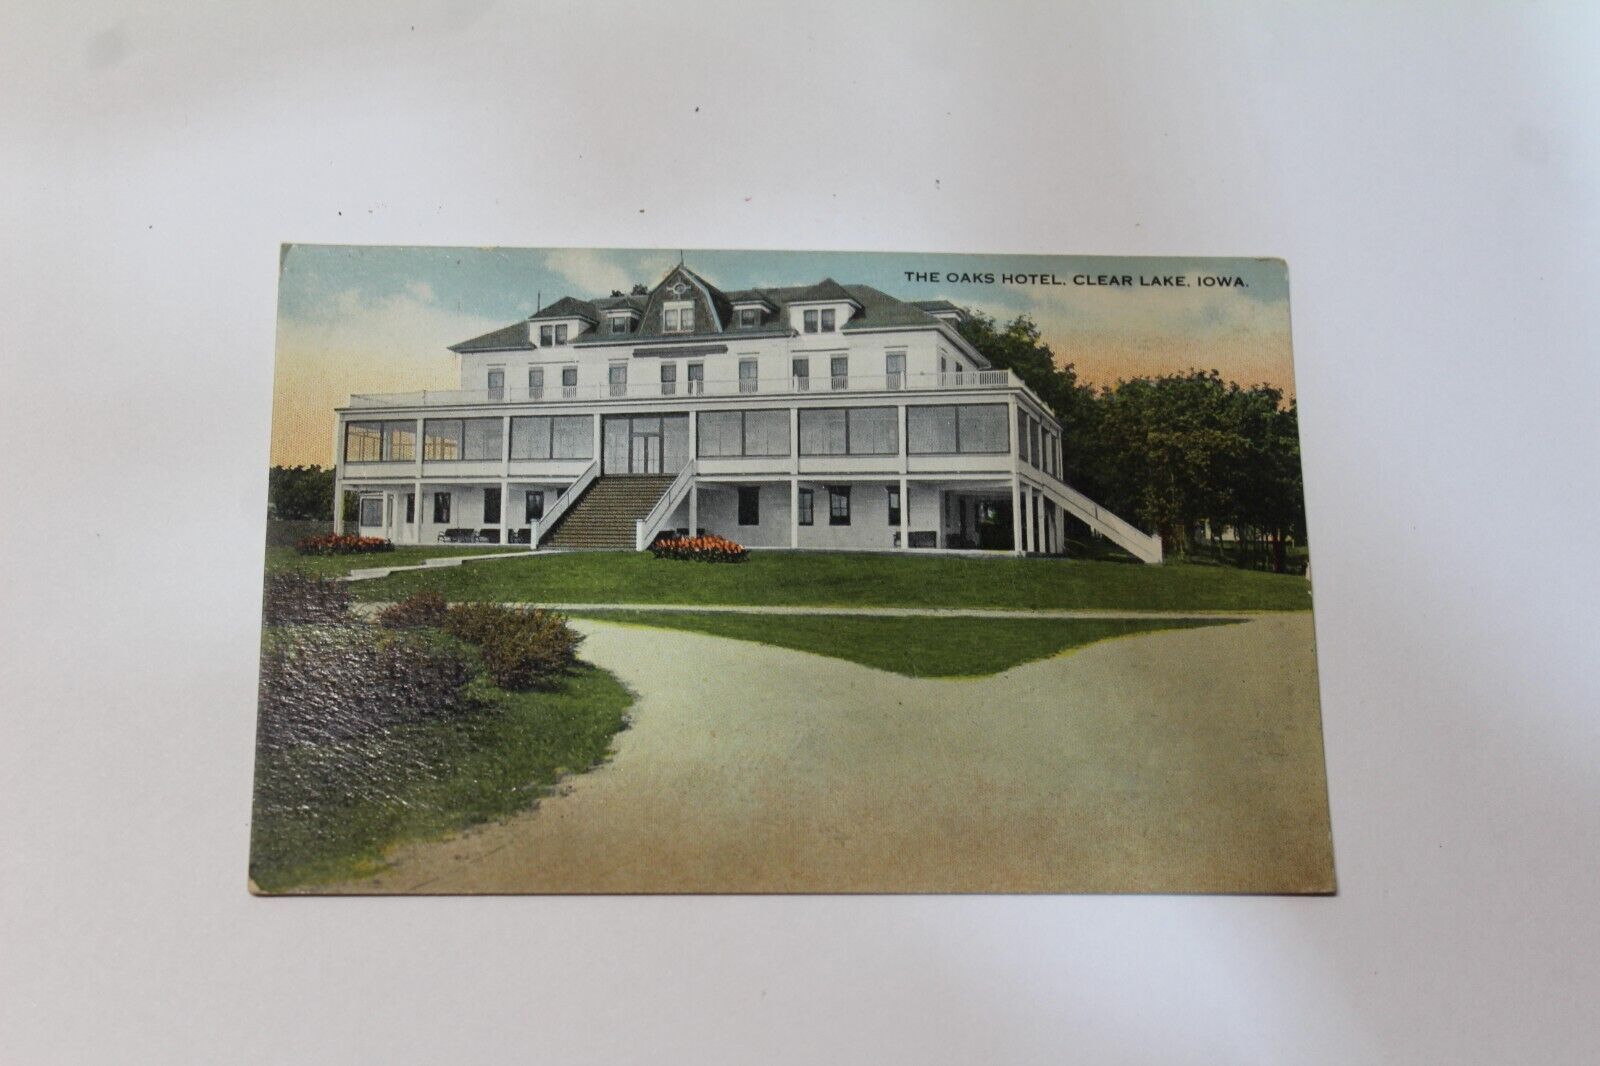 The Oaks Hotel  Clear Lake Iowa picture postcard  vintage early 1900\'s